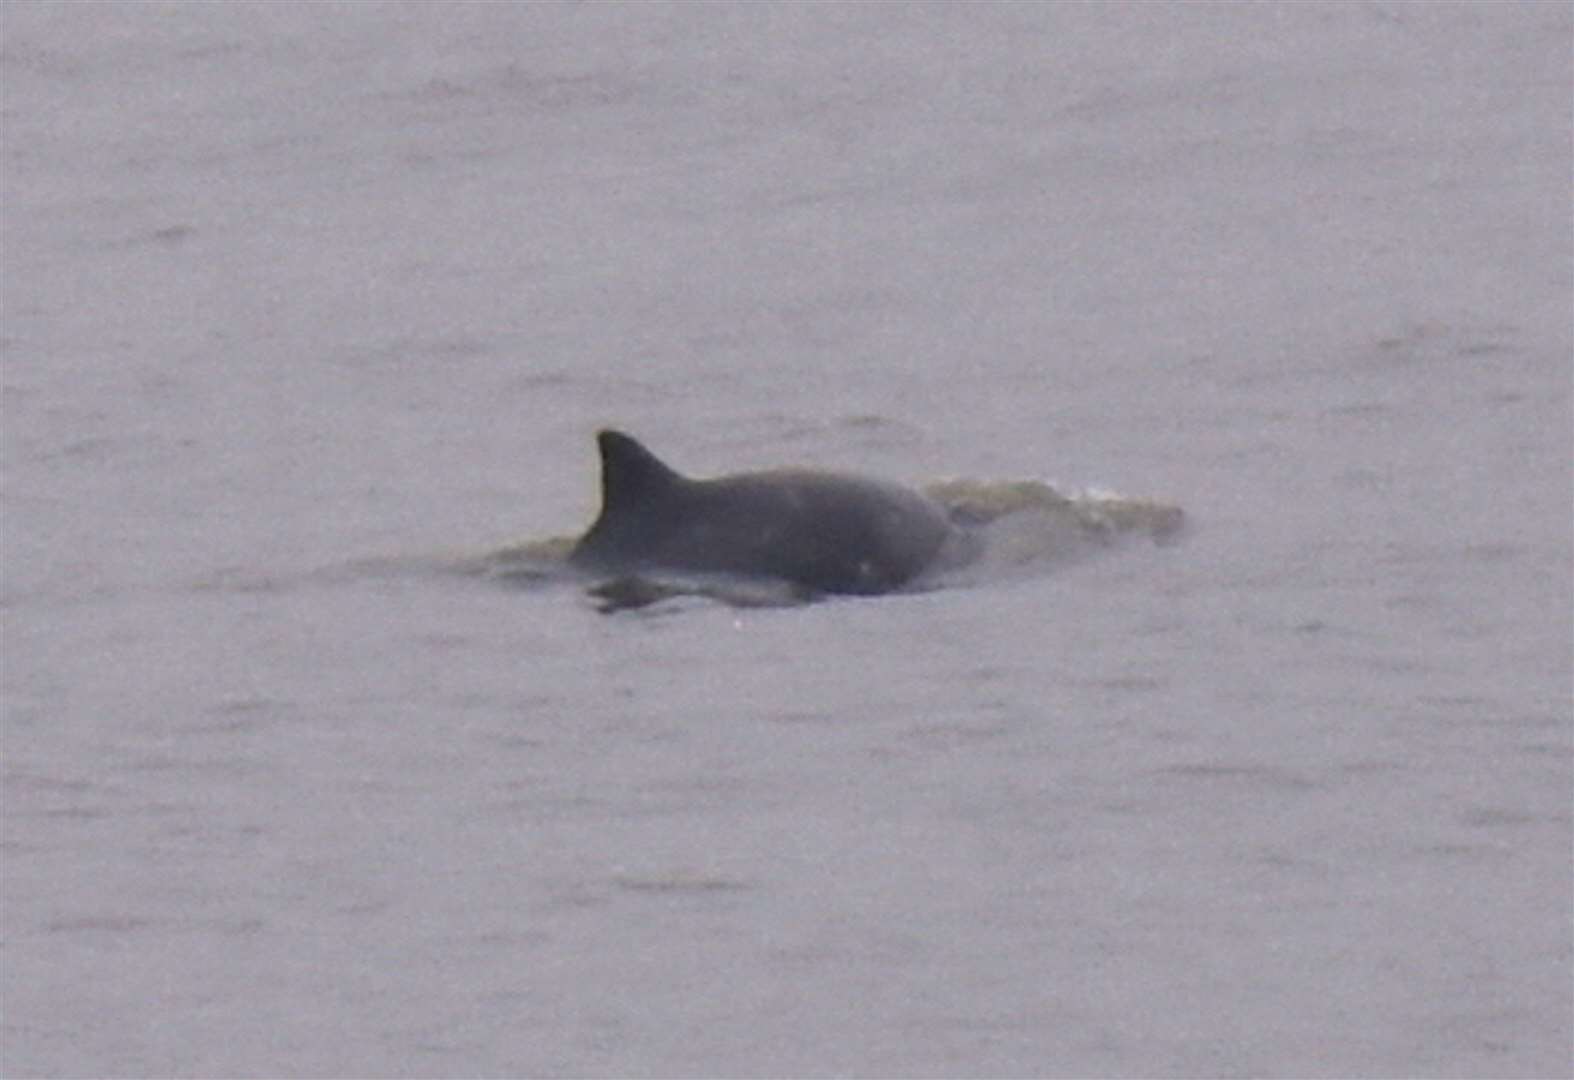 Harbour porpoise spotted swimming in River Thames near Gravesend Town Pier